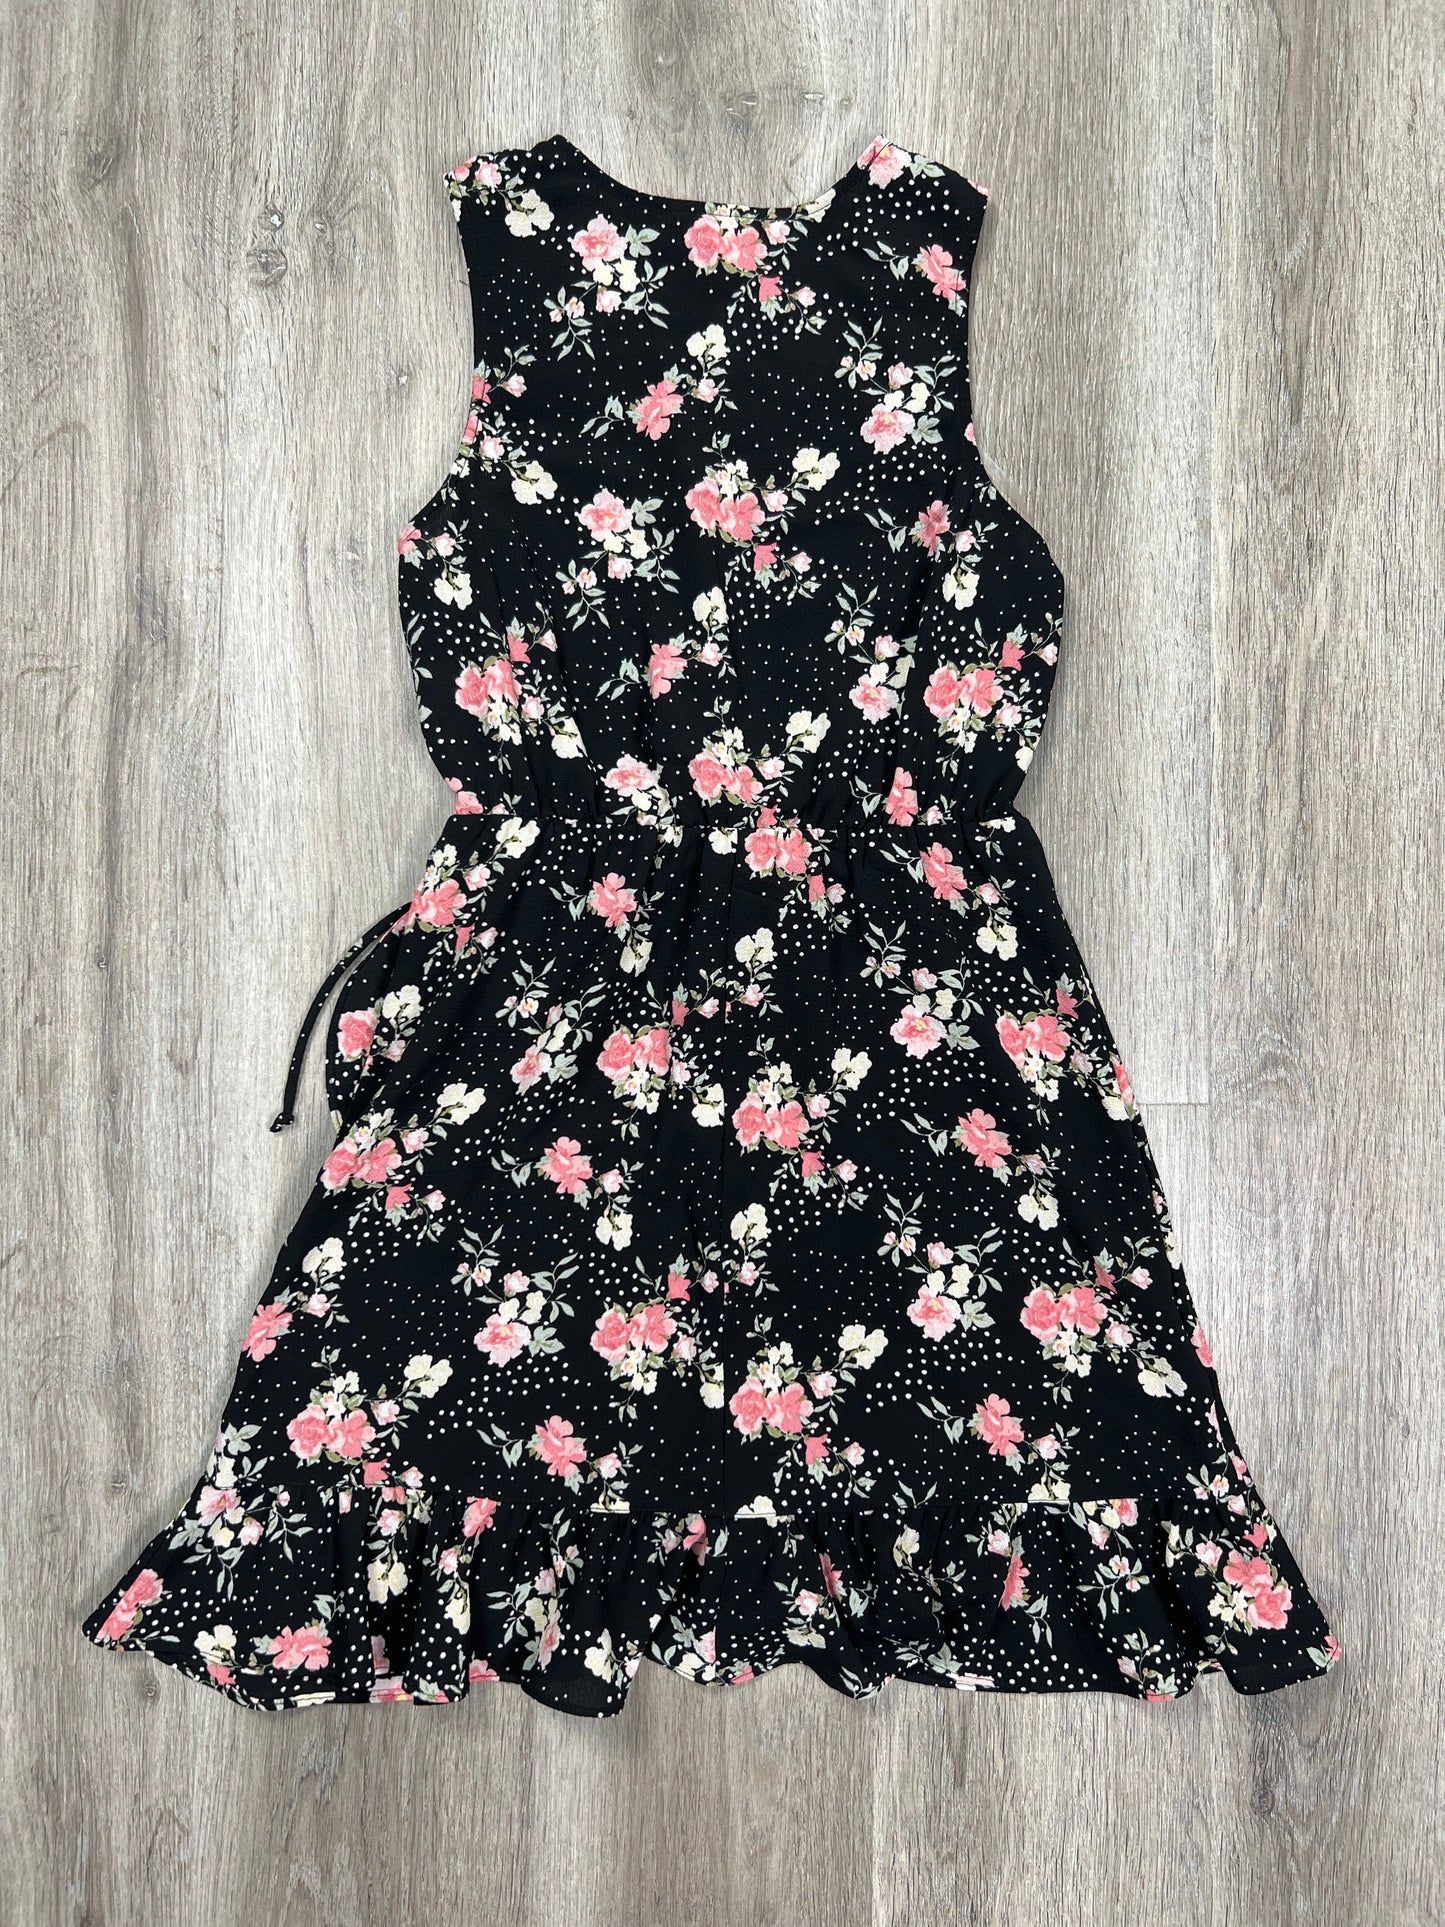 Floral Print Dress Casual Short Speechless, Size S